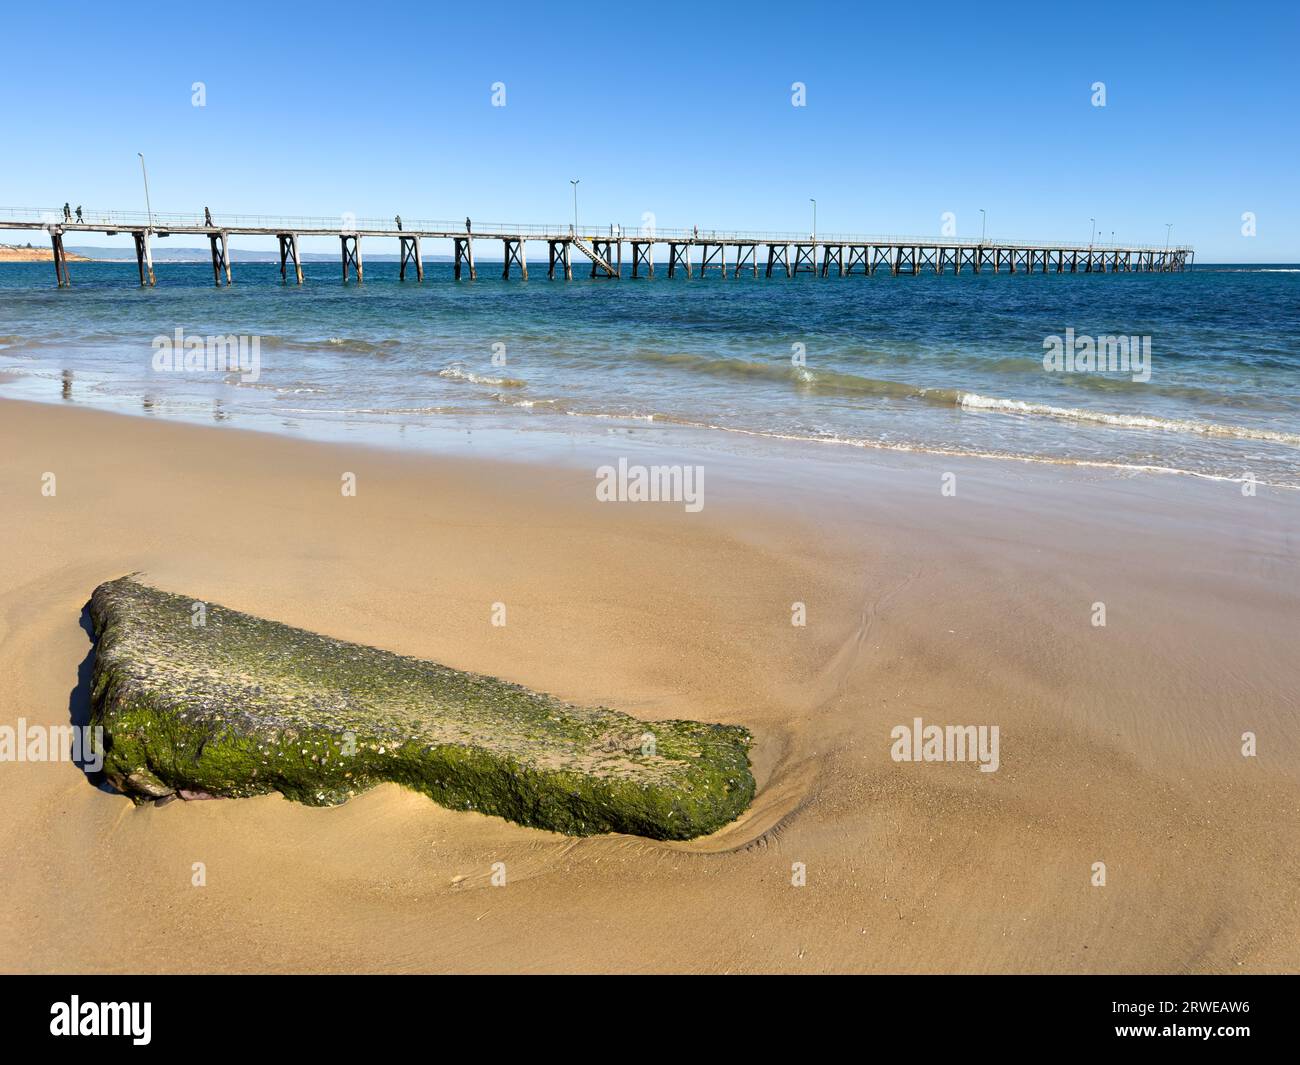 Classic wooden Port Noarlunga Jetty stretches out into the ocean in Adelaide, South Australia Stock Photo